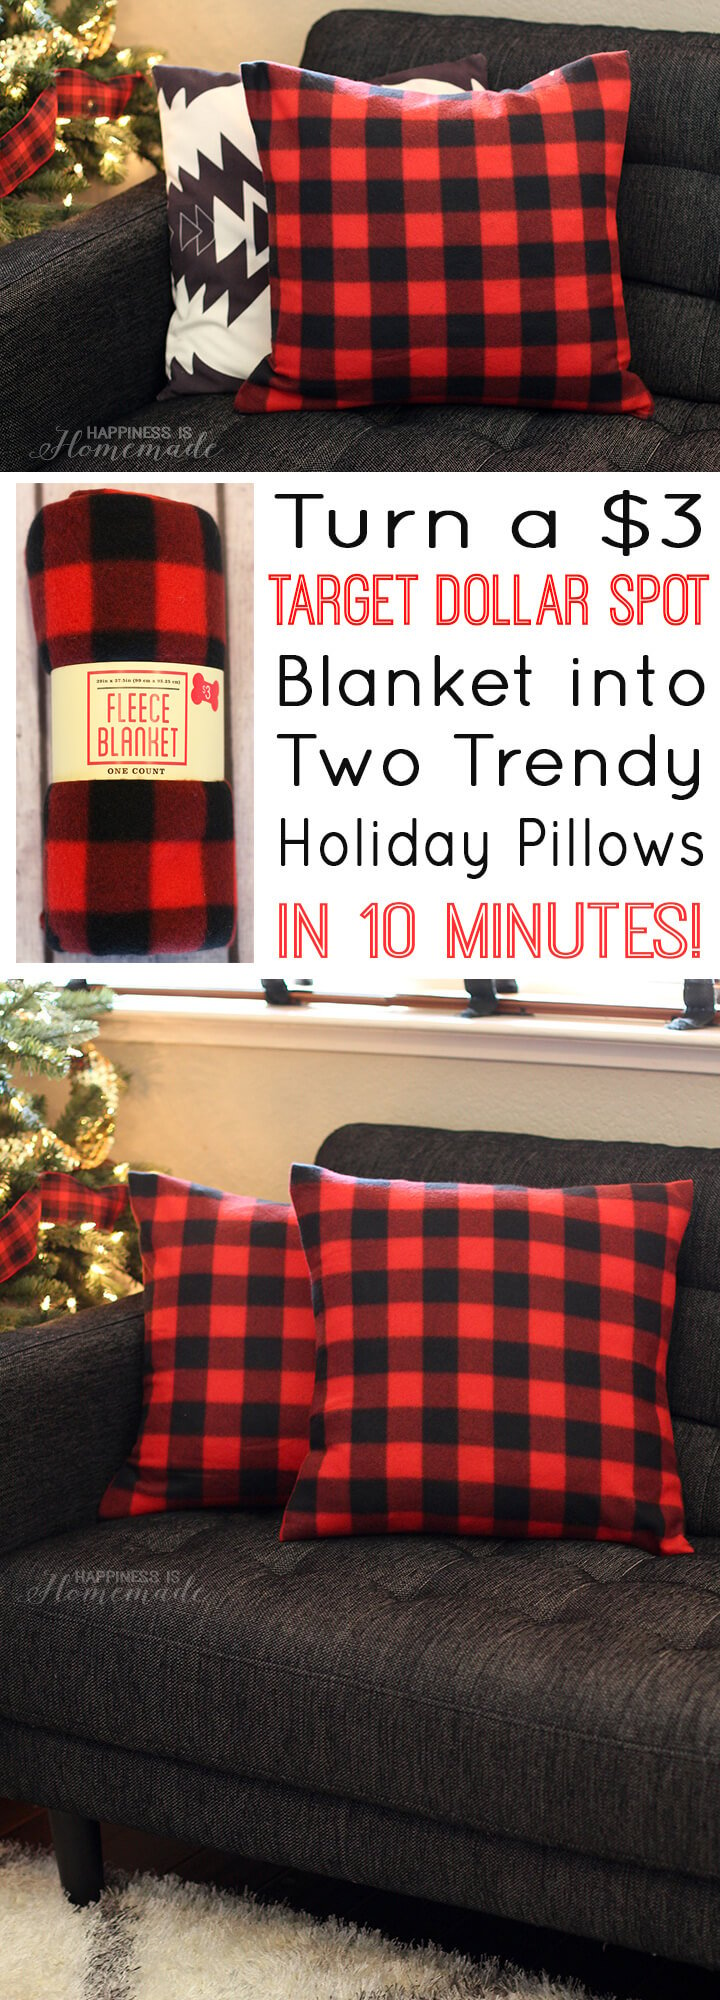 Turn a Three Dollar Target Blanket into Festive Holiday Pillows